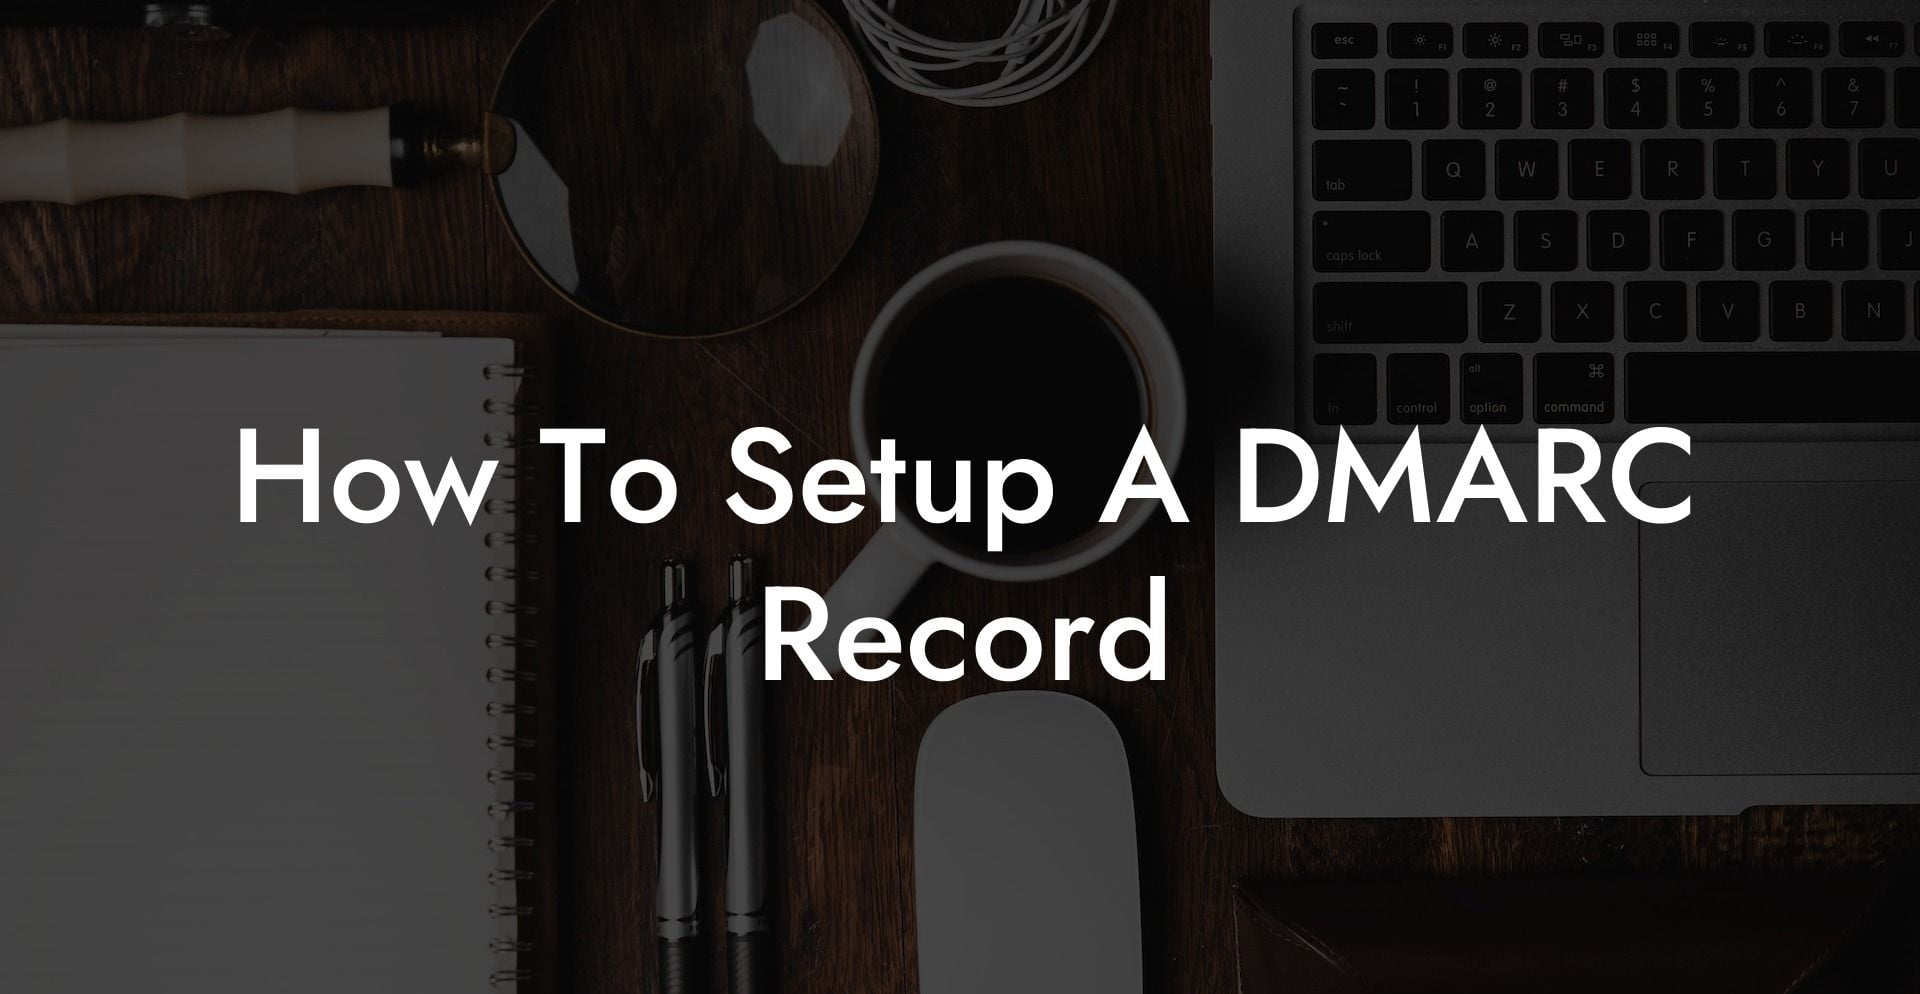 How To Setup A DMARC Record